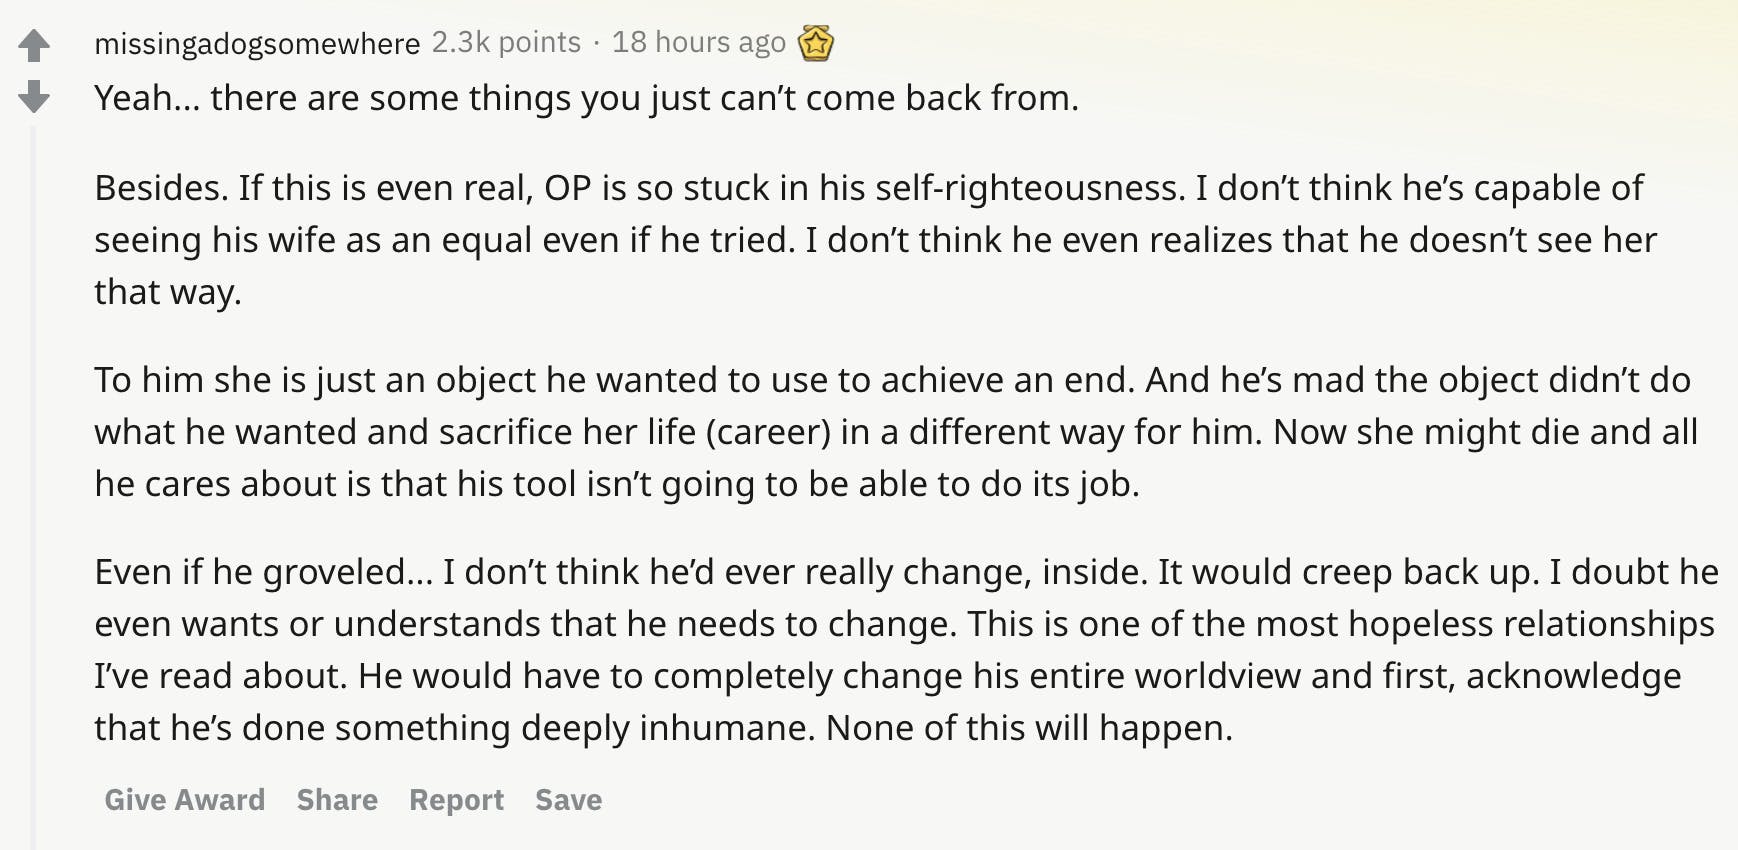 Yeah... there are some things you just can’t come back from.  Besides. If this is even real, OP is so stuck in his self-righteousness. I don’t think he’s capable of seeing his wife as an equal even if he tried. I don’t think he even realizes that he doesn’t see her that way.  To him she is just an object he wanted to use to achieve an end. And he’s mad the object didn’t do what he wanted and sacrifice her life (career) in a different way for him. Now she might die and all he cares about is that his tool isn’t going to be able to do its job.  Even if he groveled... I don’t think he’d ever really change, inside. It would creep back up. I doubt he even wants or understands that he needs to change. This is one of the most hopeless relationships I’ve read about. He would have to completely change his entire worldview and first, acknowledge that he’s done something deeply inhumane. None of this will happen.